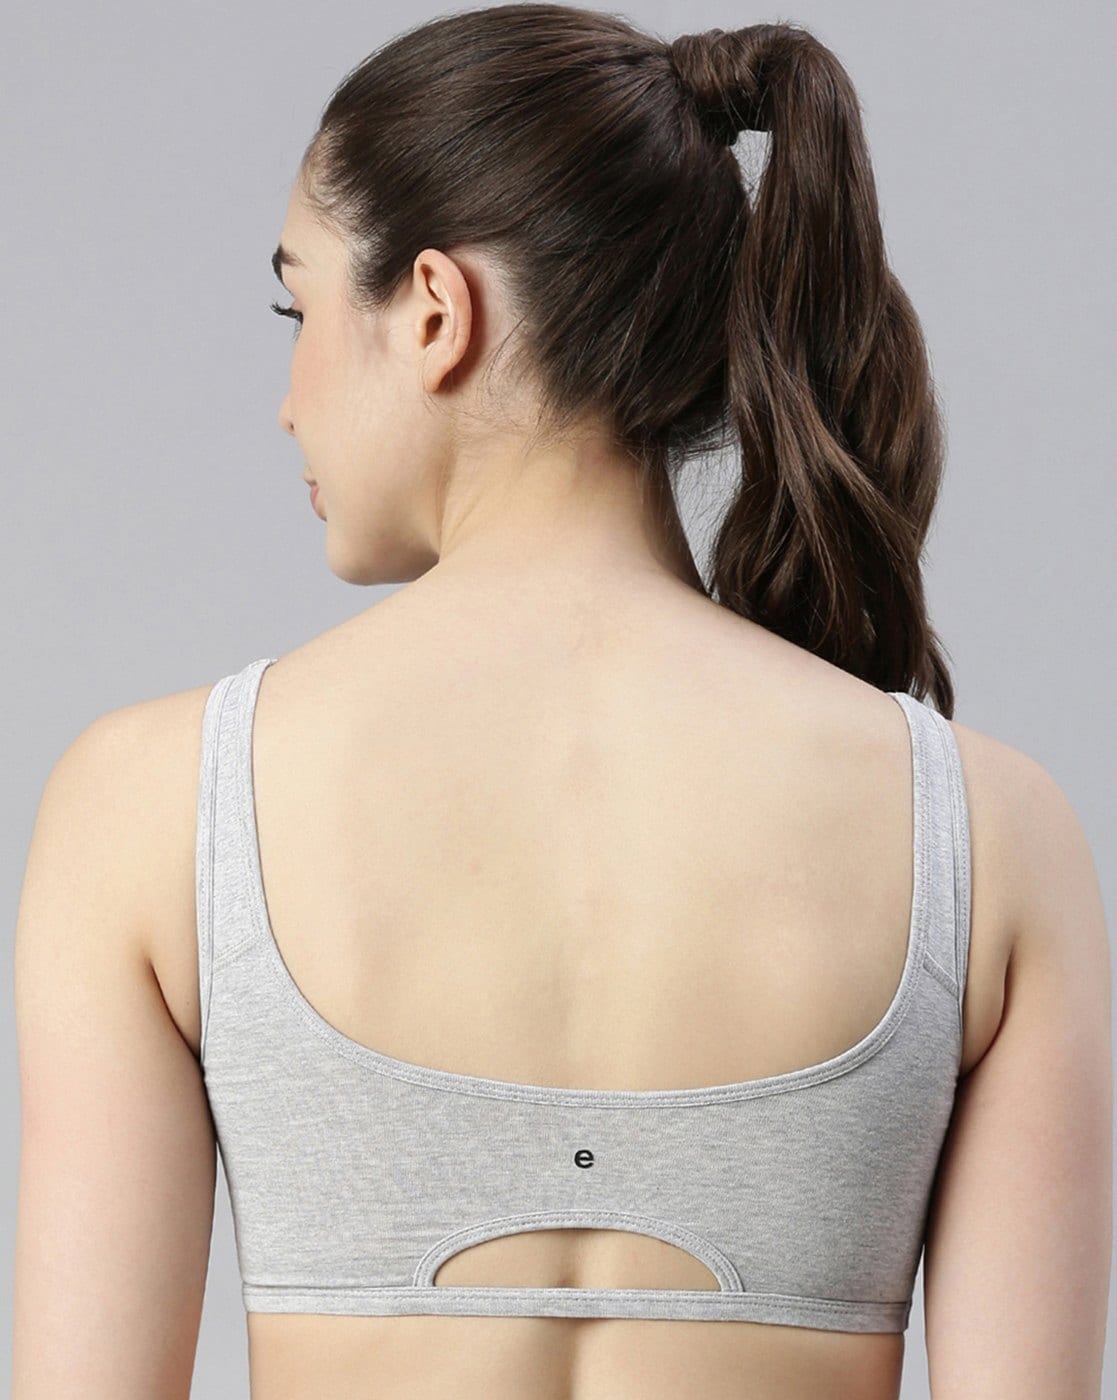 Enamor SB06 Low Impact Cotton Sports Bra - Non-Padded Wirefree - Grey XL in  Bangalore at best price by Gokaldas Images Pvt Ltd (Head Office) - Justdial